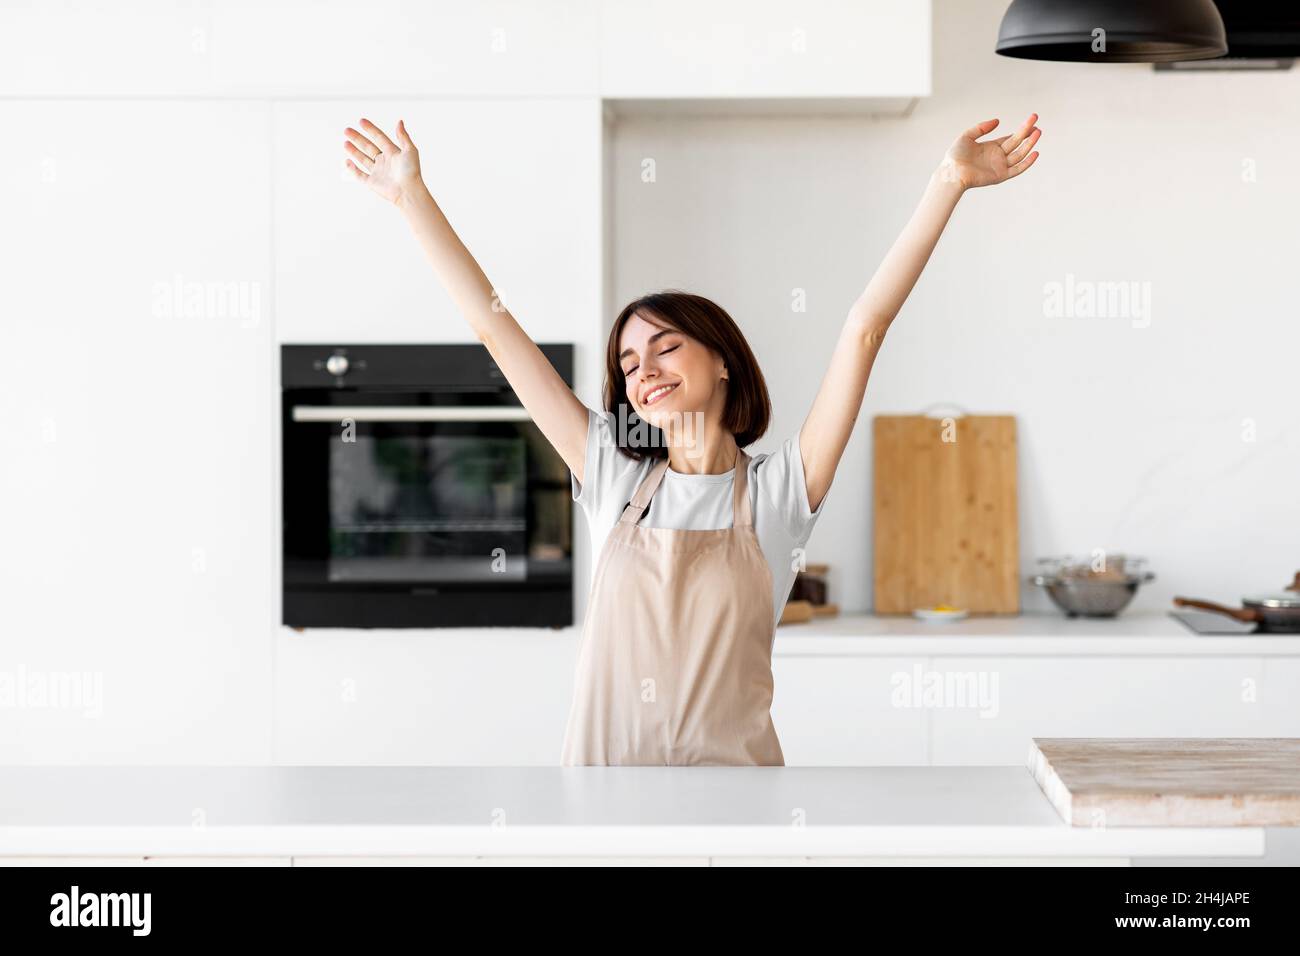 Relaxed young lady raising hands and feeling excited cooking alone in modern kitchen interior, having fun Stock Photo